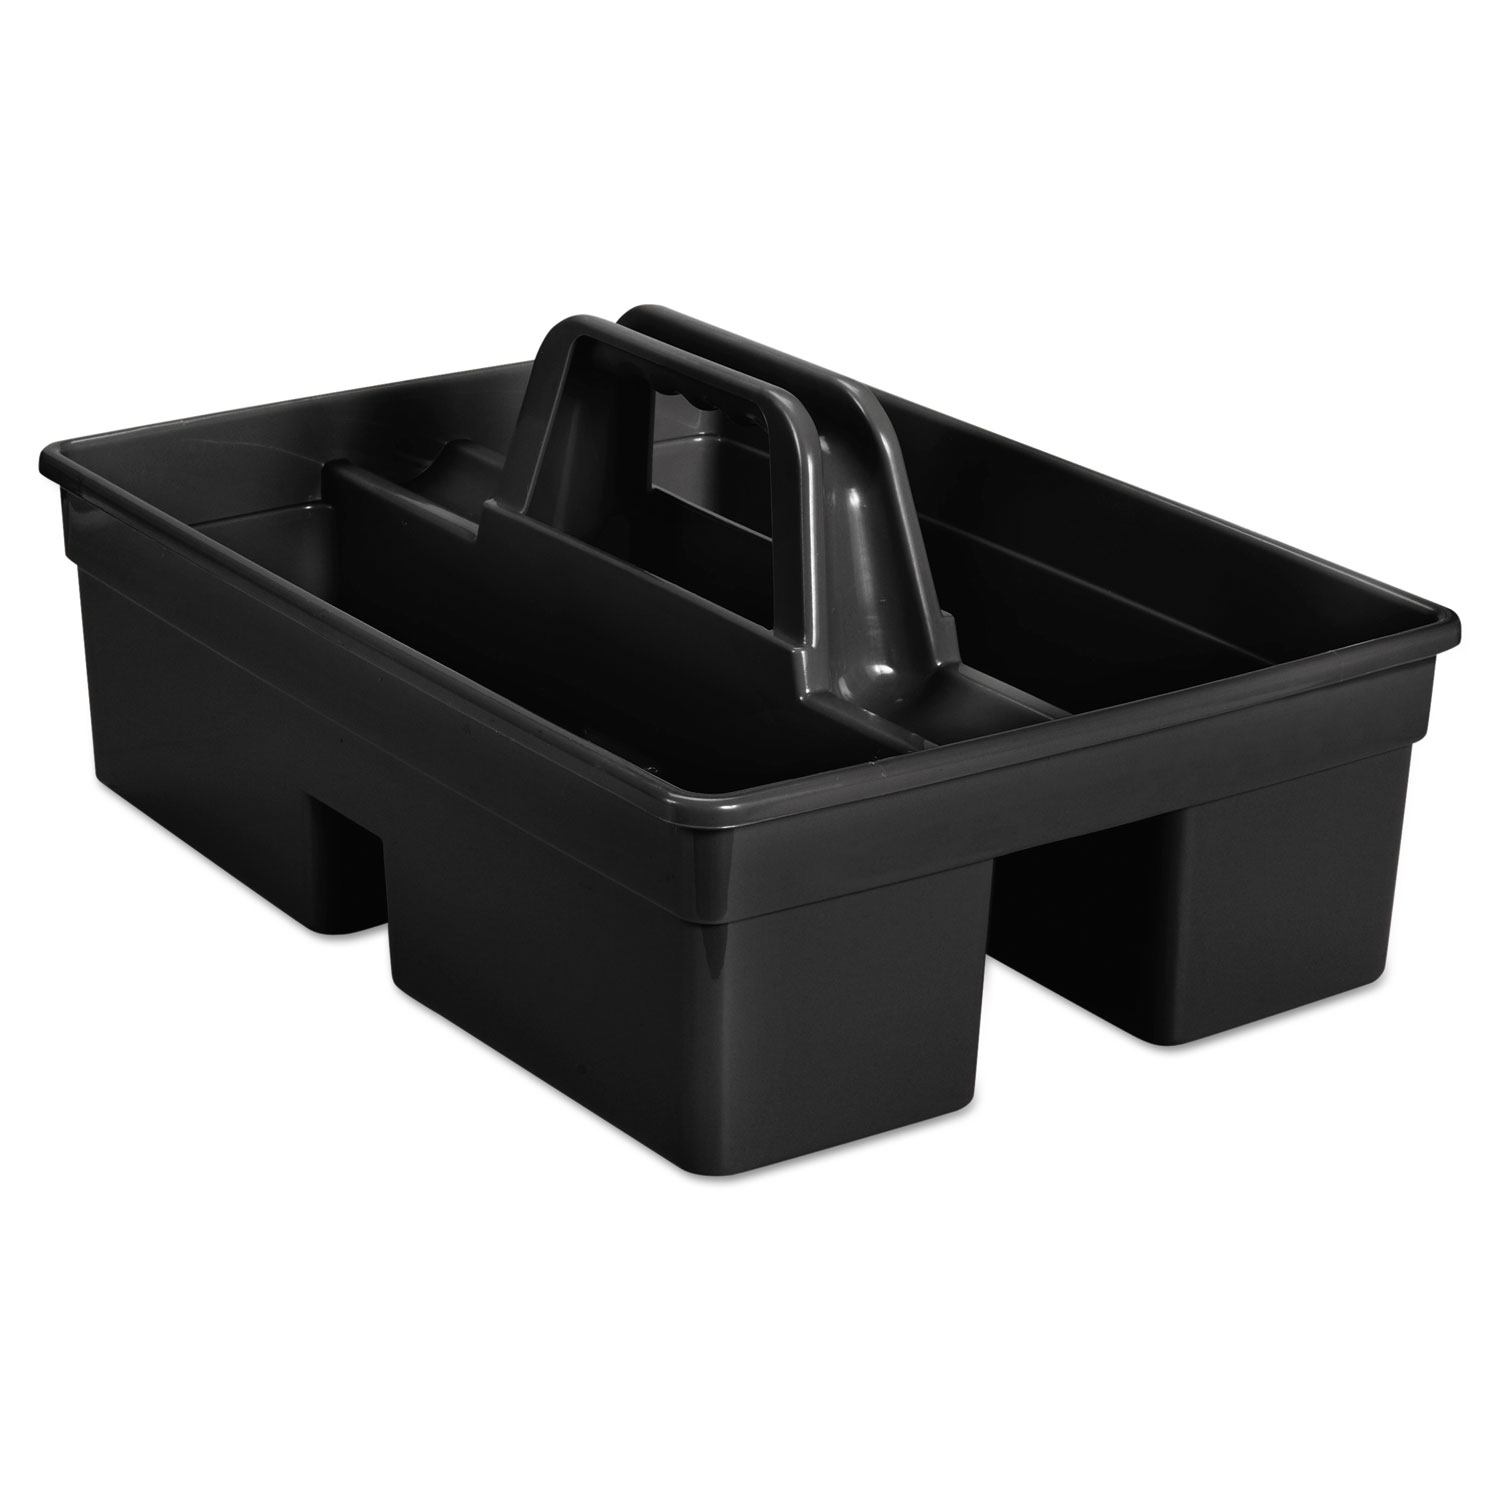  Rubbermaid Commercial 1880994 Executive Carry Caddy, 2-Compartment, Plastic, 10.75w x 6.5h, Black (RCP1880994) 